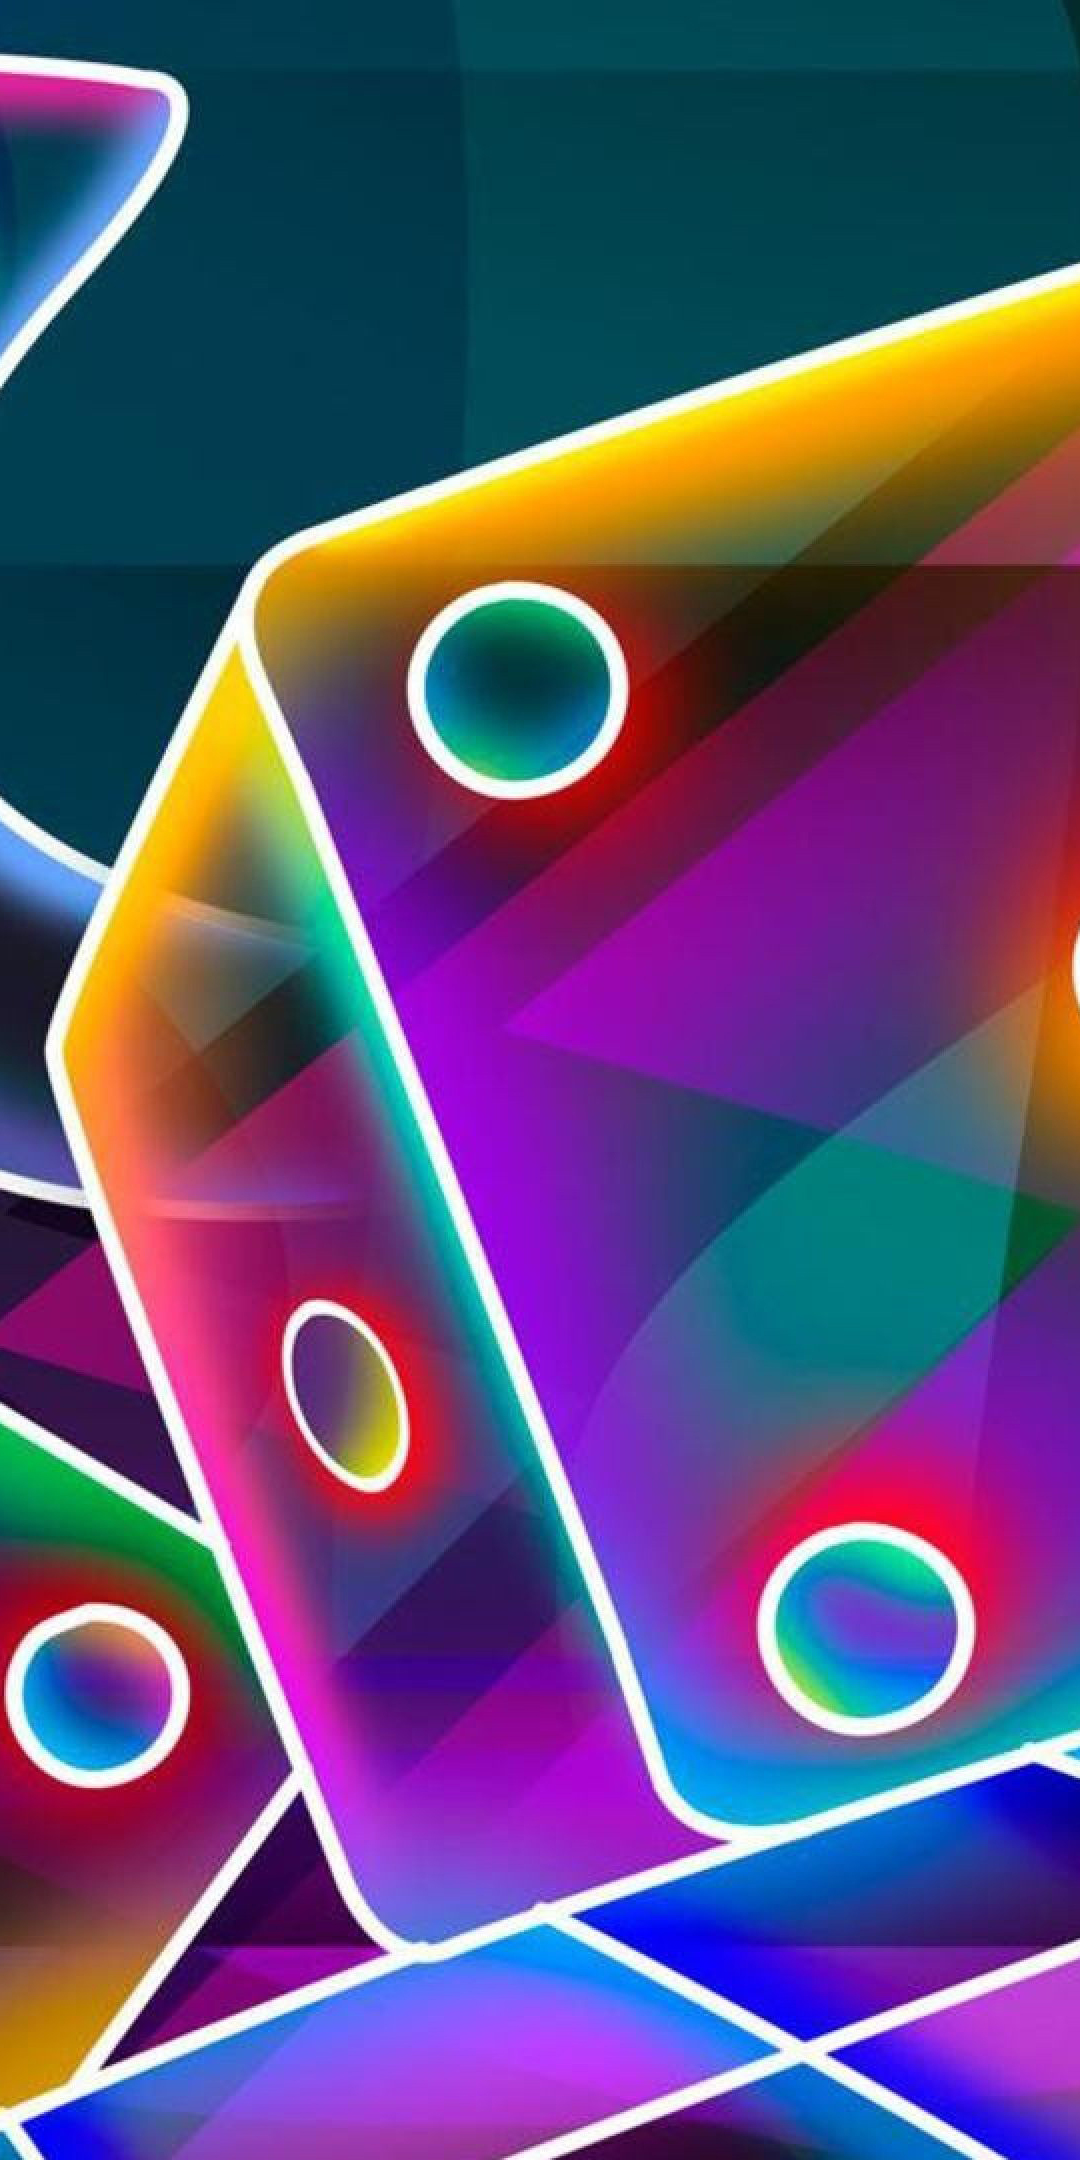 Cubes, transparent and colorful, abstract, 1080x2160 wallpaper